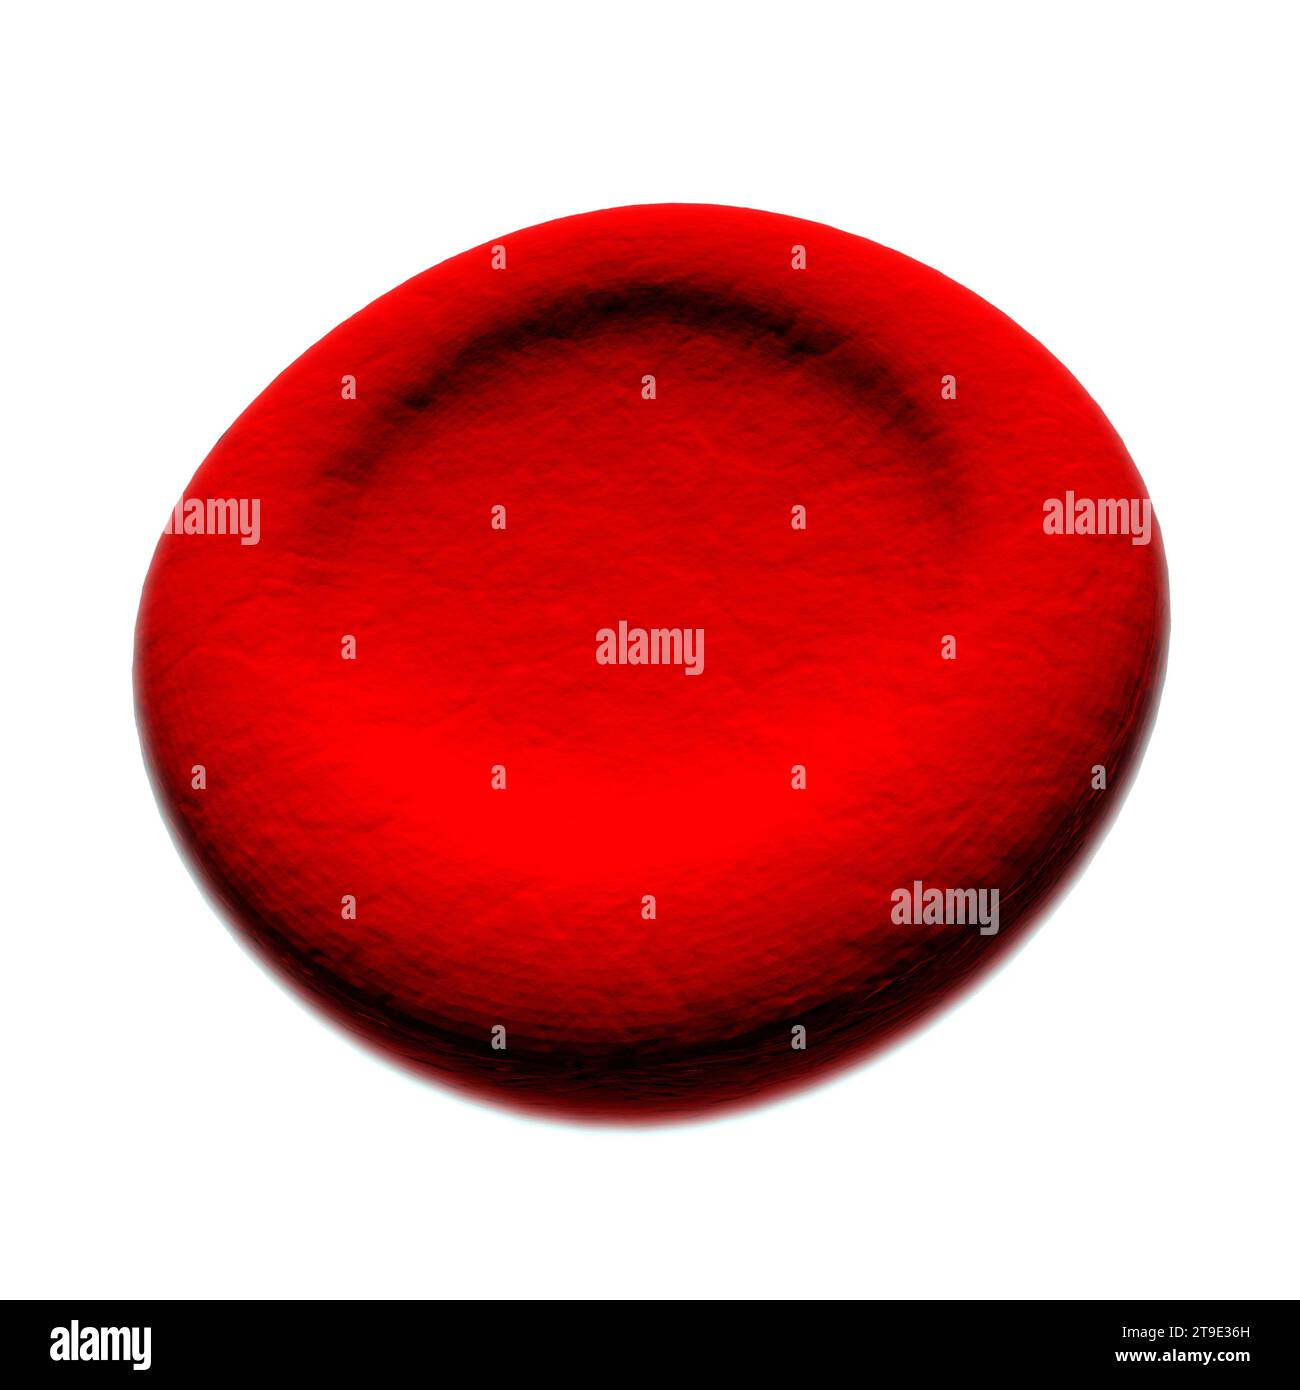 Macrocyte abnormal red blood cell, illustration Stock Photo